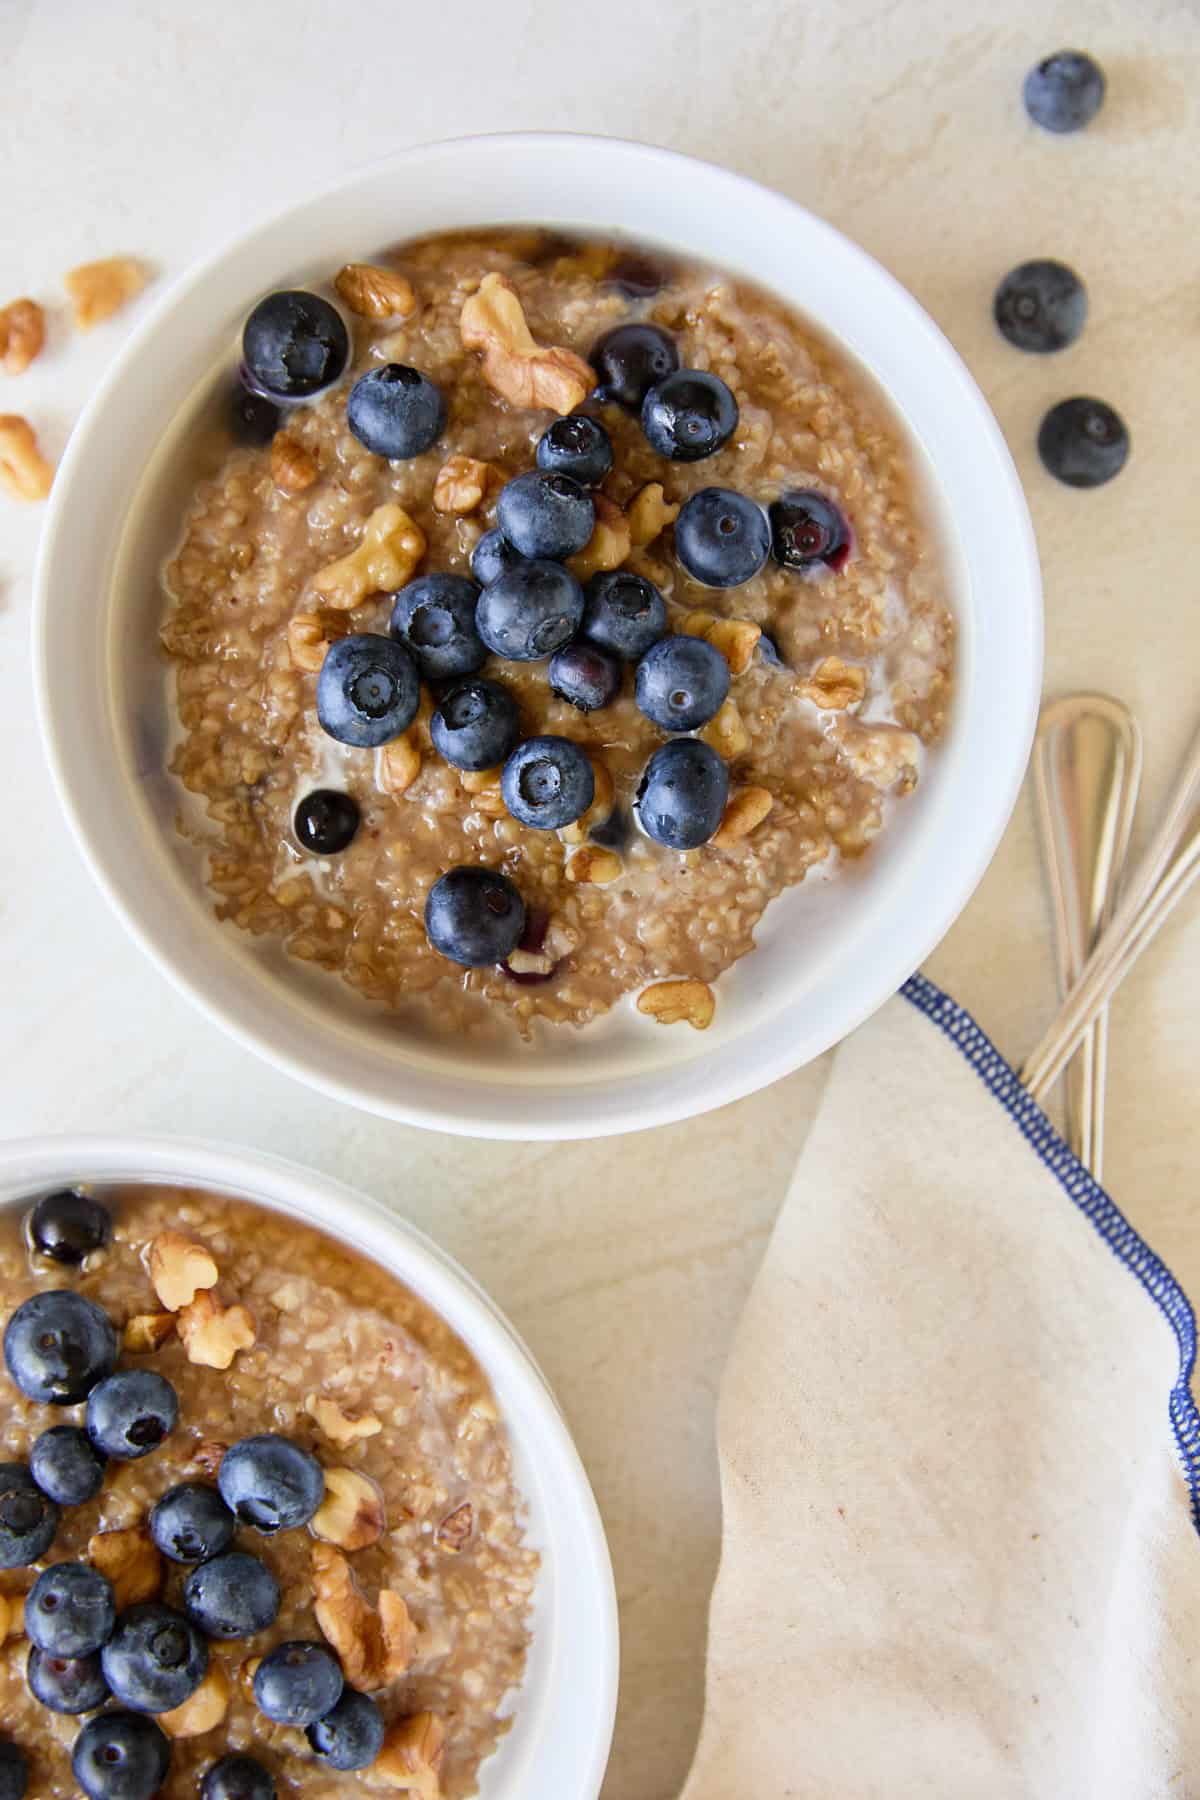 Top-down view of two bowls of blueberry steel cut oats, each topped with fresh blueberries and walnuts.